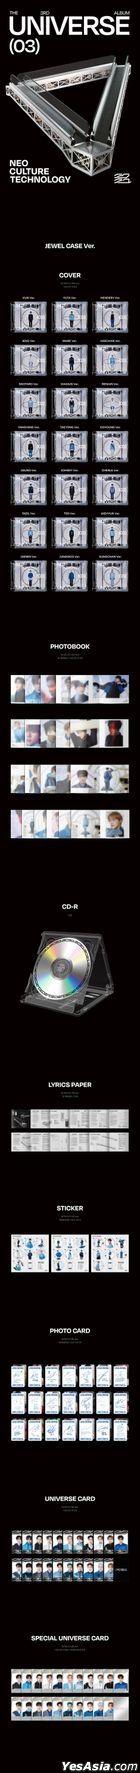 NCT Vol. 3 - Universe (Jewel Case Version) (Sung Chan Version) + Poster in Tube